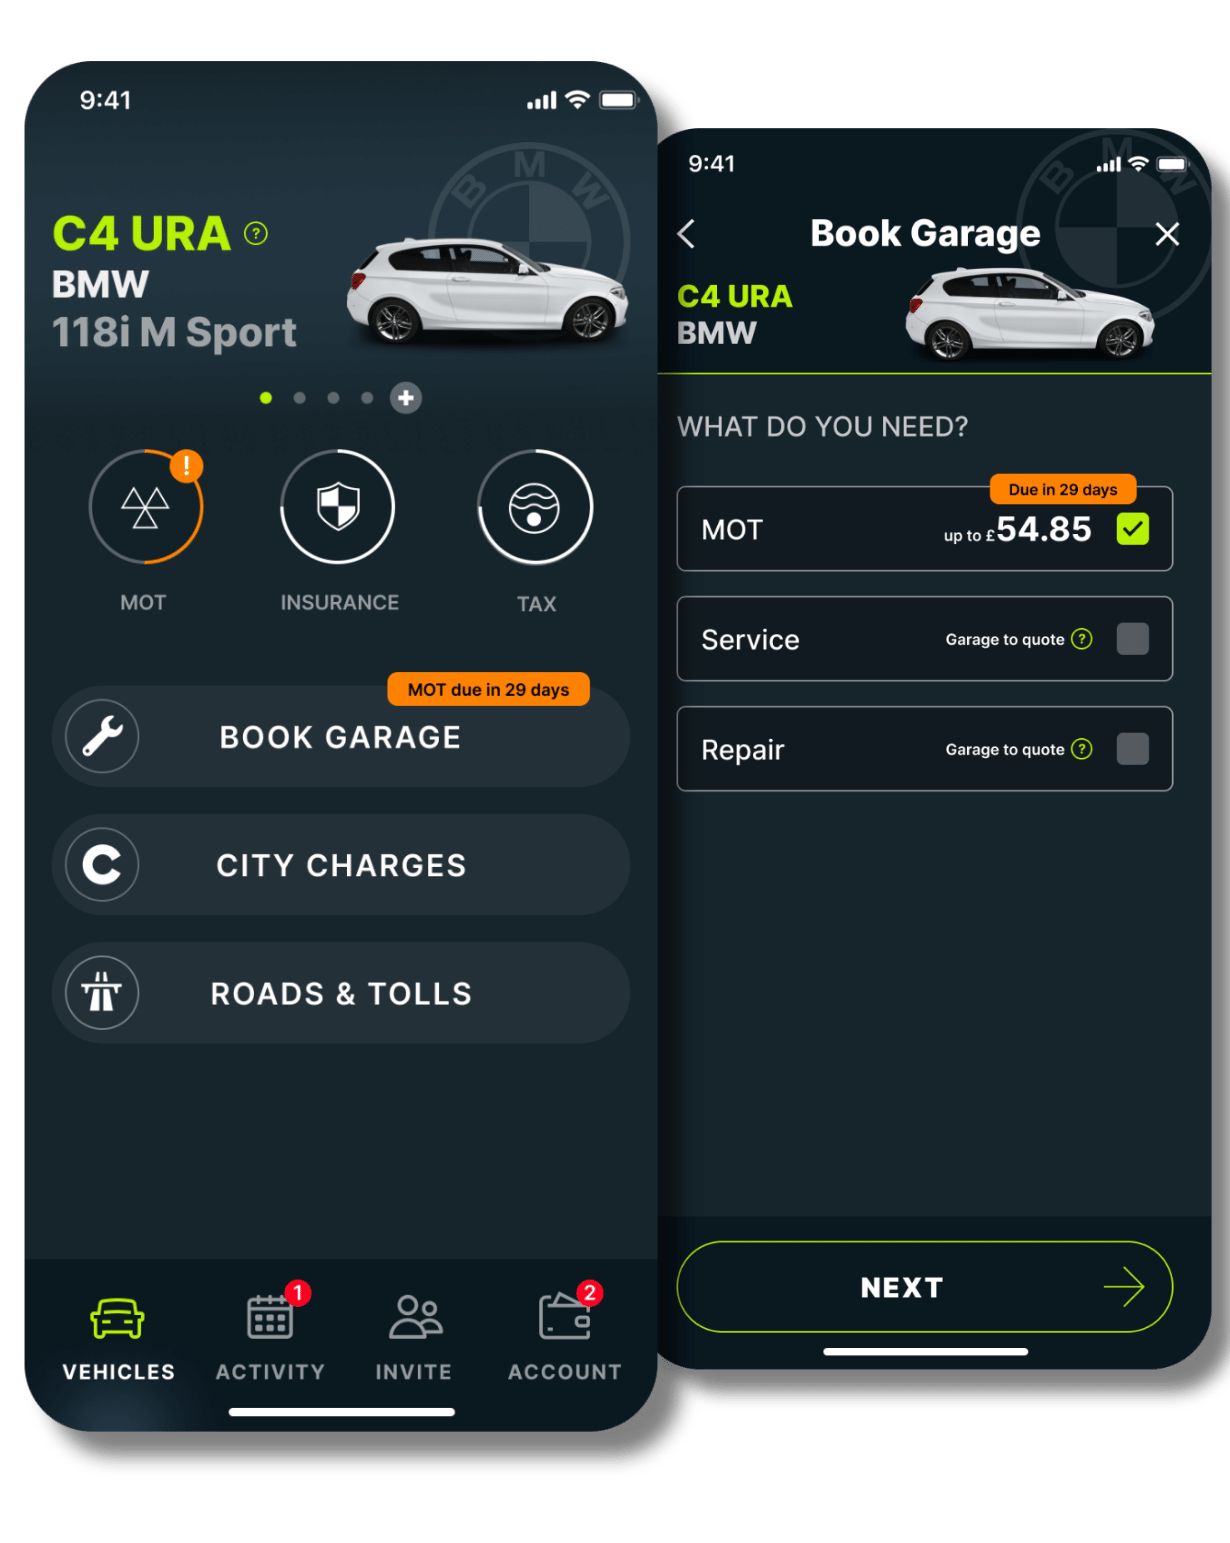 Caura home screen showing the new 'Book Garage' feature and MOT, car service and repair screen